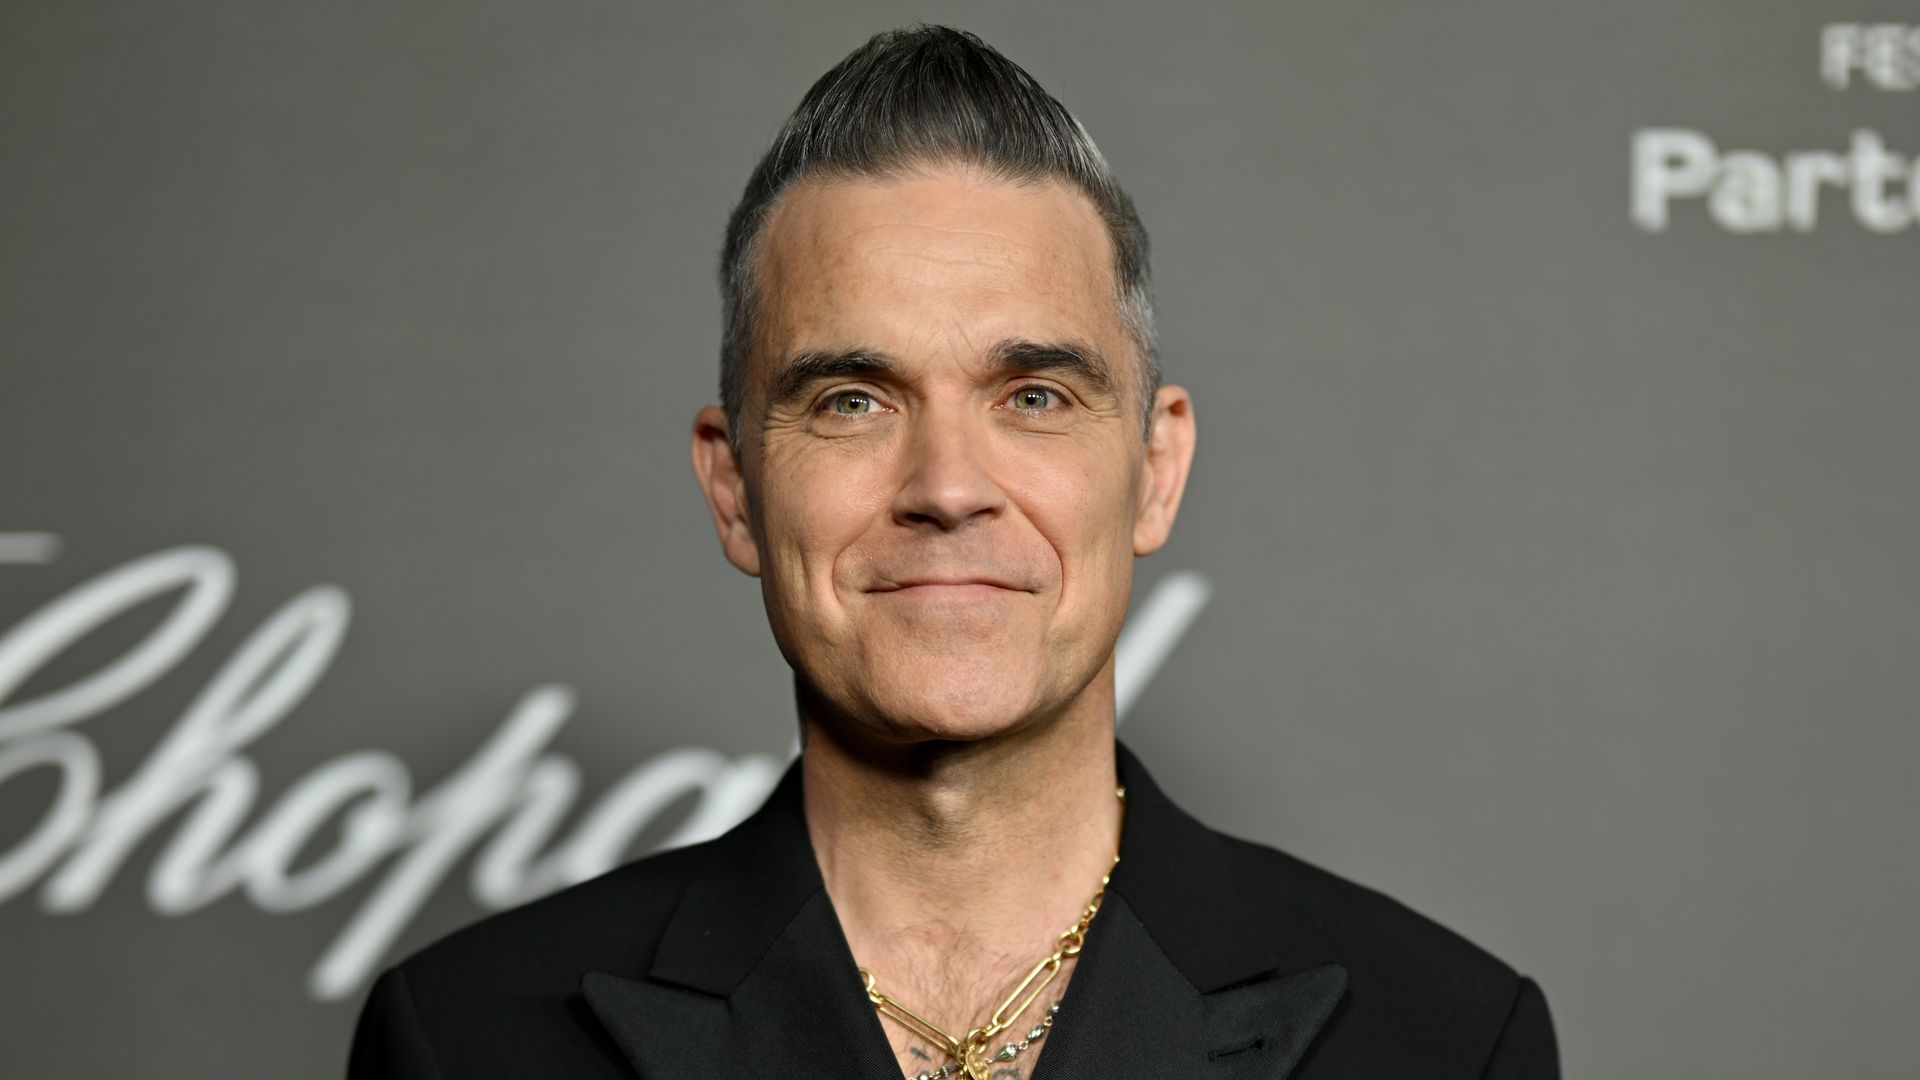 Robbie Williams smiling at a press photo opportunity